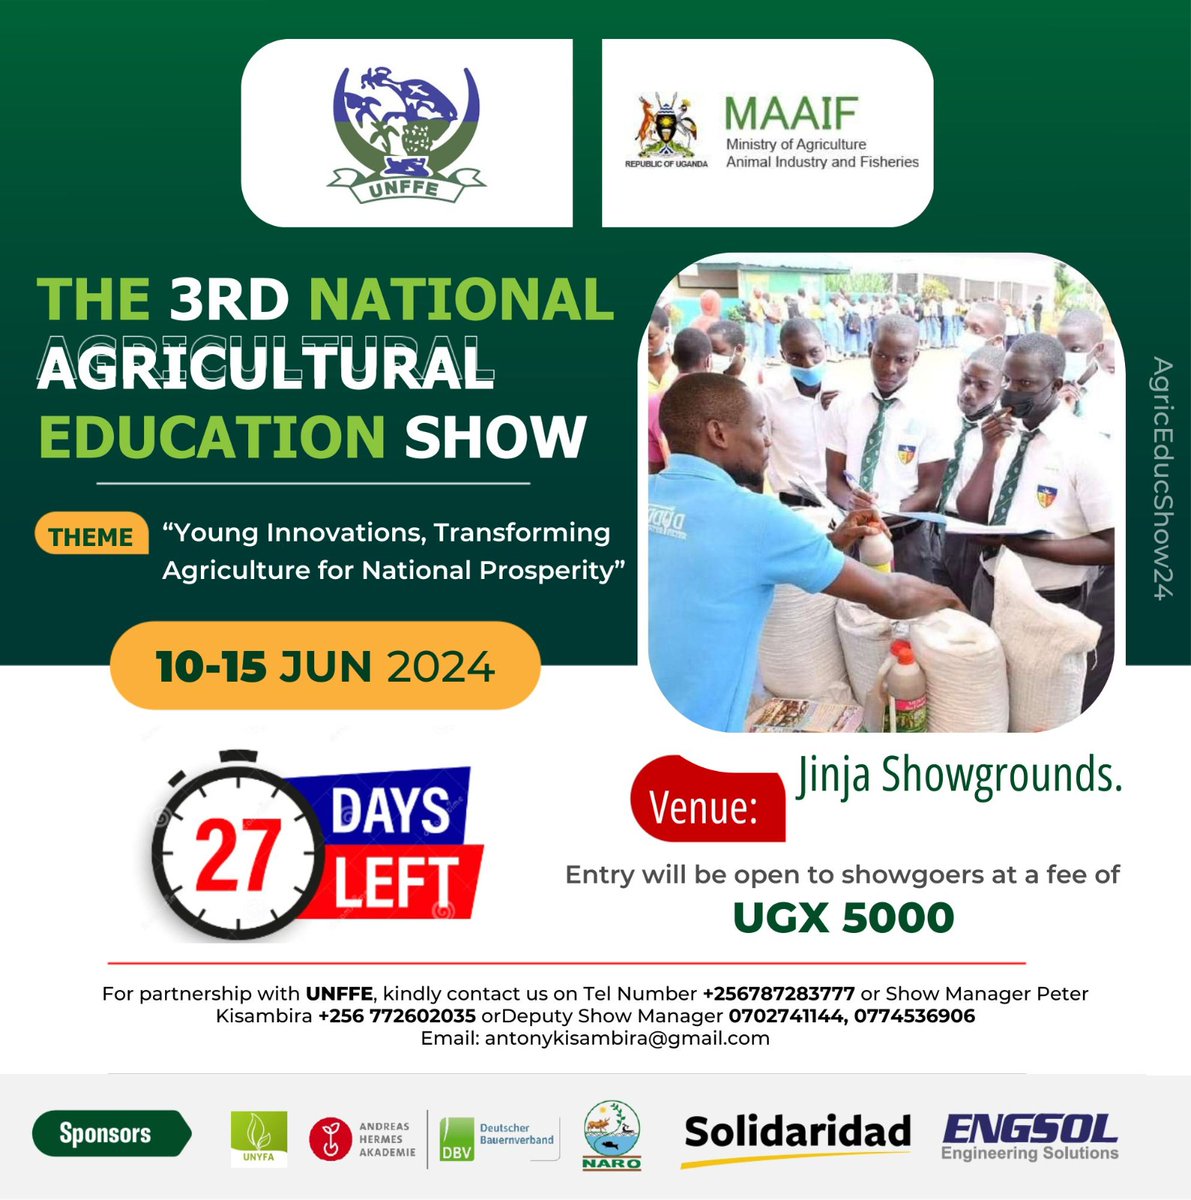 27 days remaining for the 3rd National Agricultural Education show. Come and see young innovators showcase their ideas. #AgricEducShow24 @MAAIF_Uganda @Solidaridadnetw @unyfa1 @KKatungisa @Educ_SportsUg @unffe